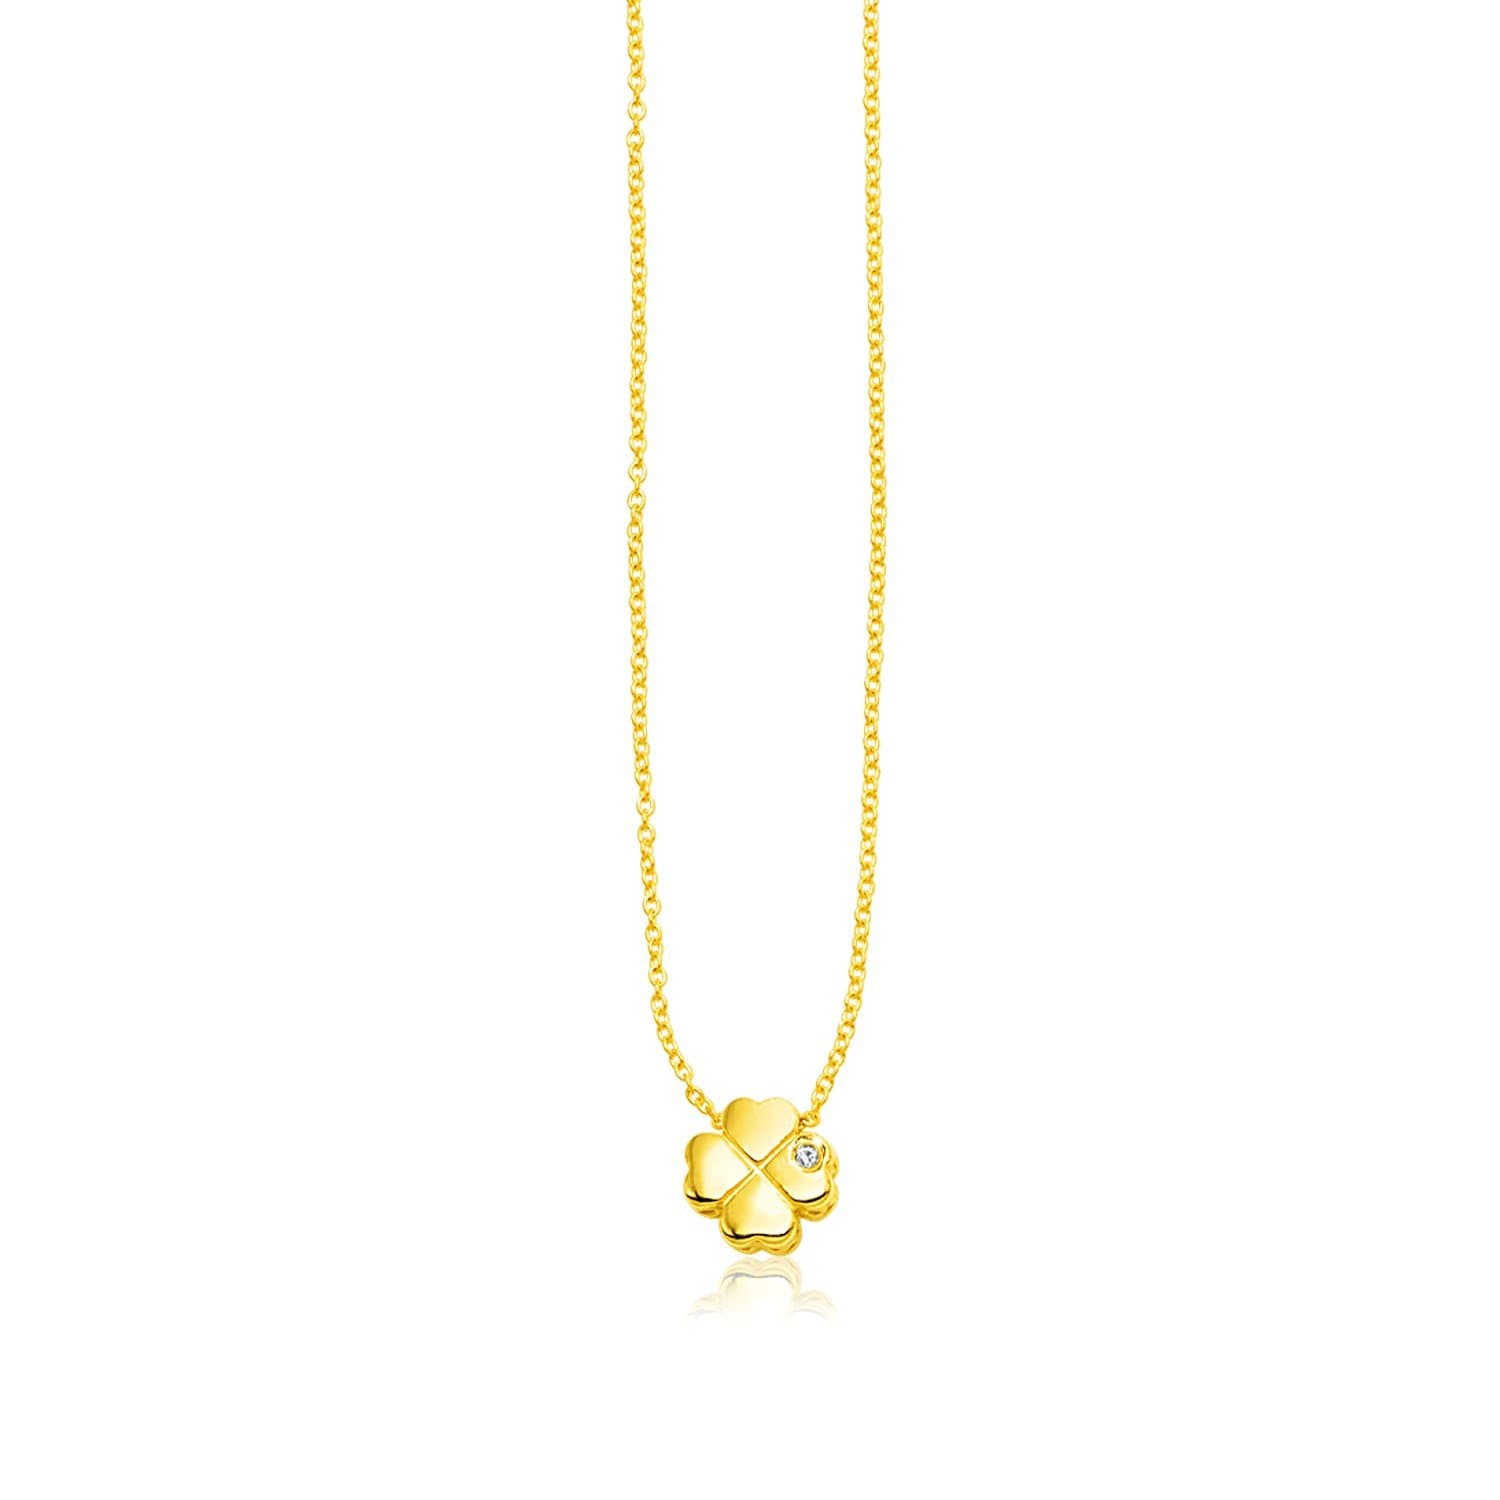 14k Yellow Gold Polished Four Leaf Clover Necklace with Diamond